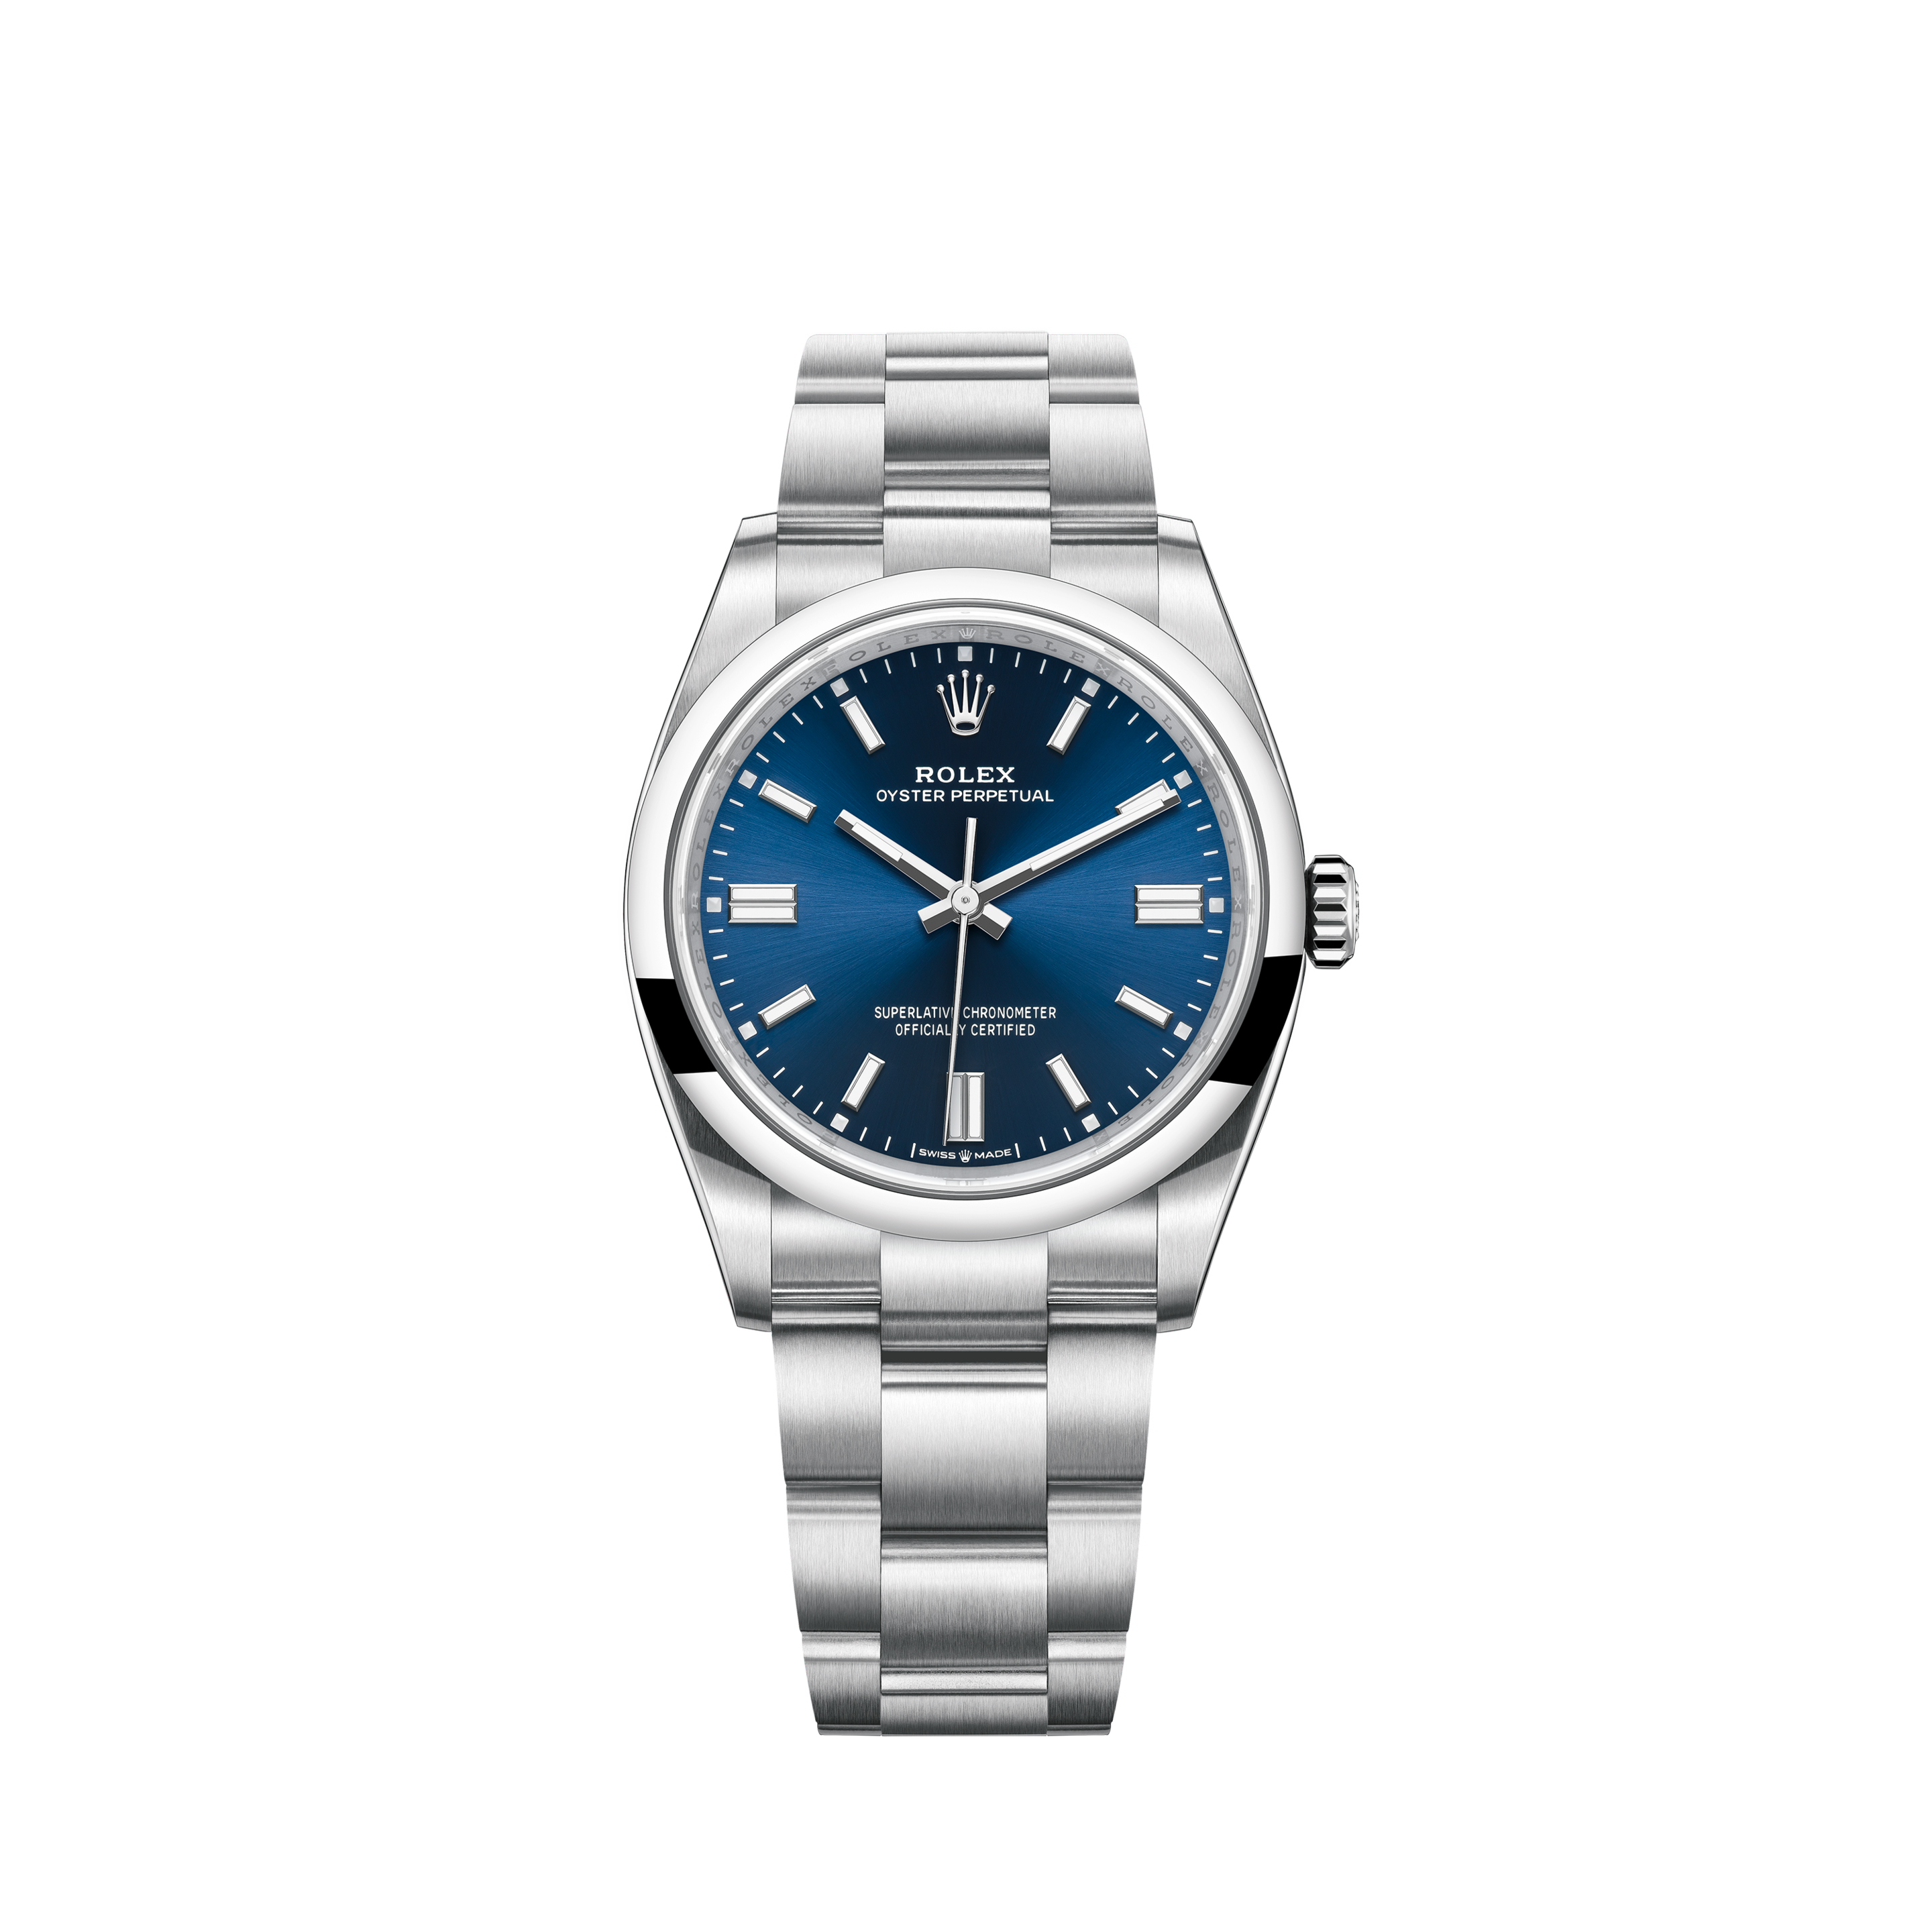 Montre Rolex Oyster Perpetual 36 